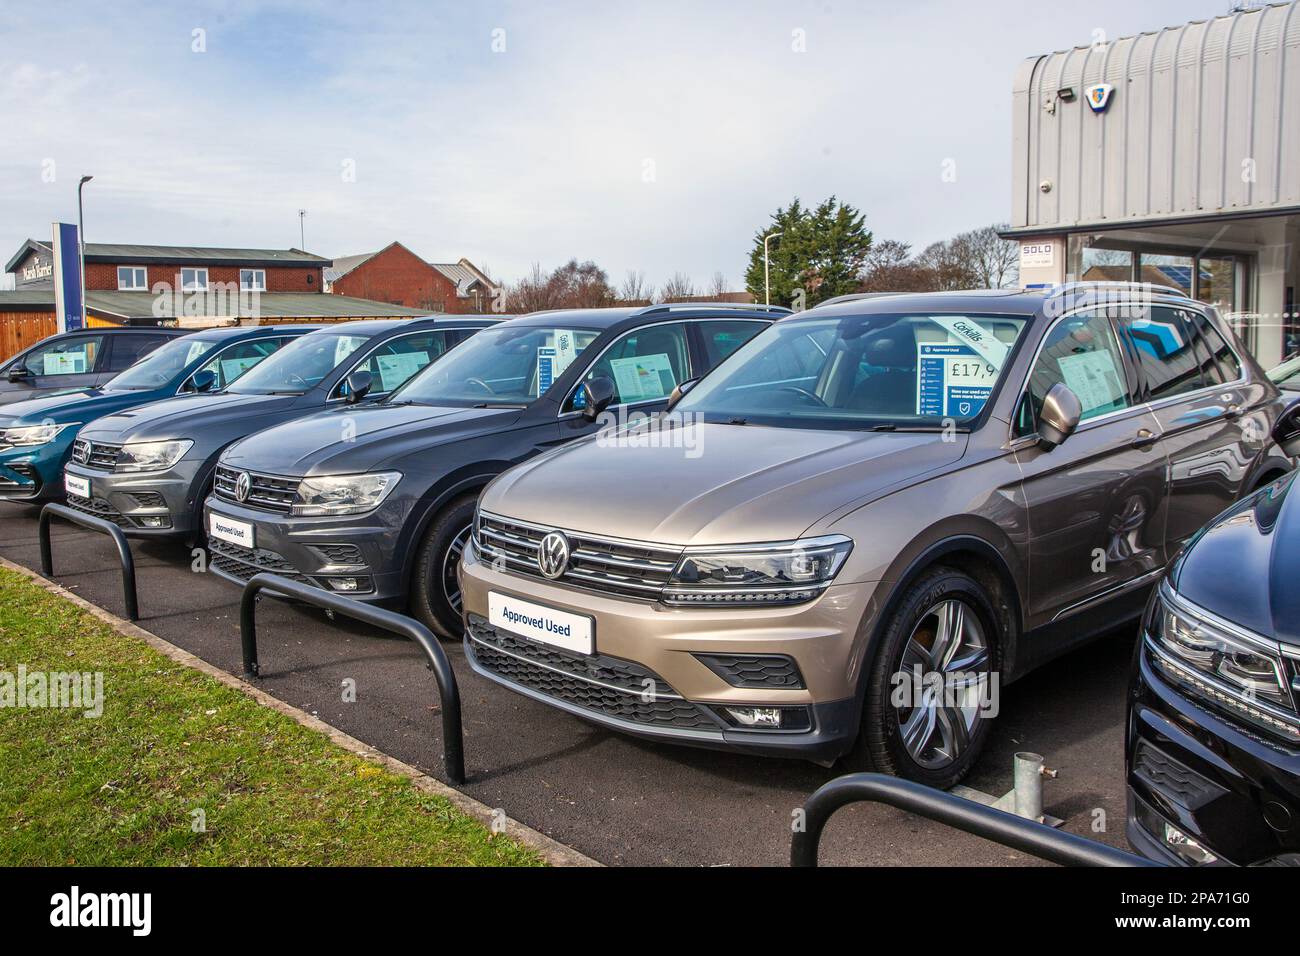 2017 Beige VW Volkswagen Tiguan SEL TDI BMT. 150 SCR 2WD Bluemotion Start/Stop Priced second-hand Vw Volkswagen Cars, for Sale at Corkhills, Southport, UK Stock Photo